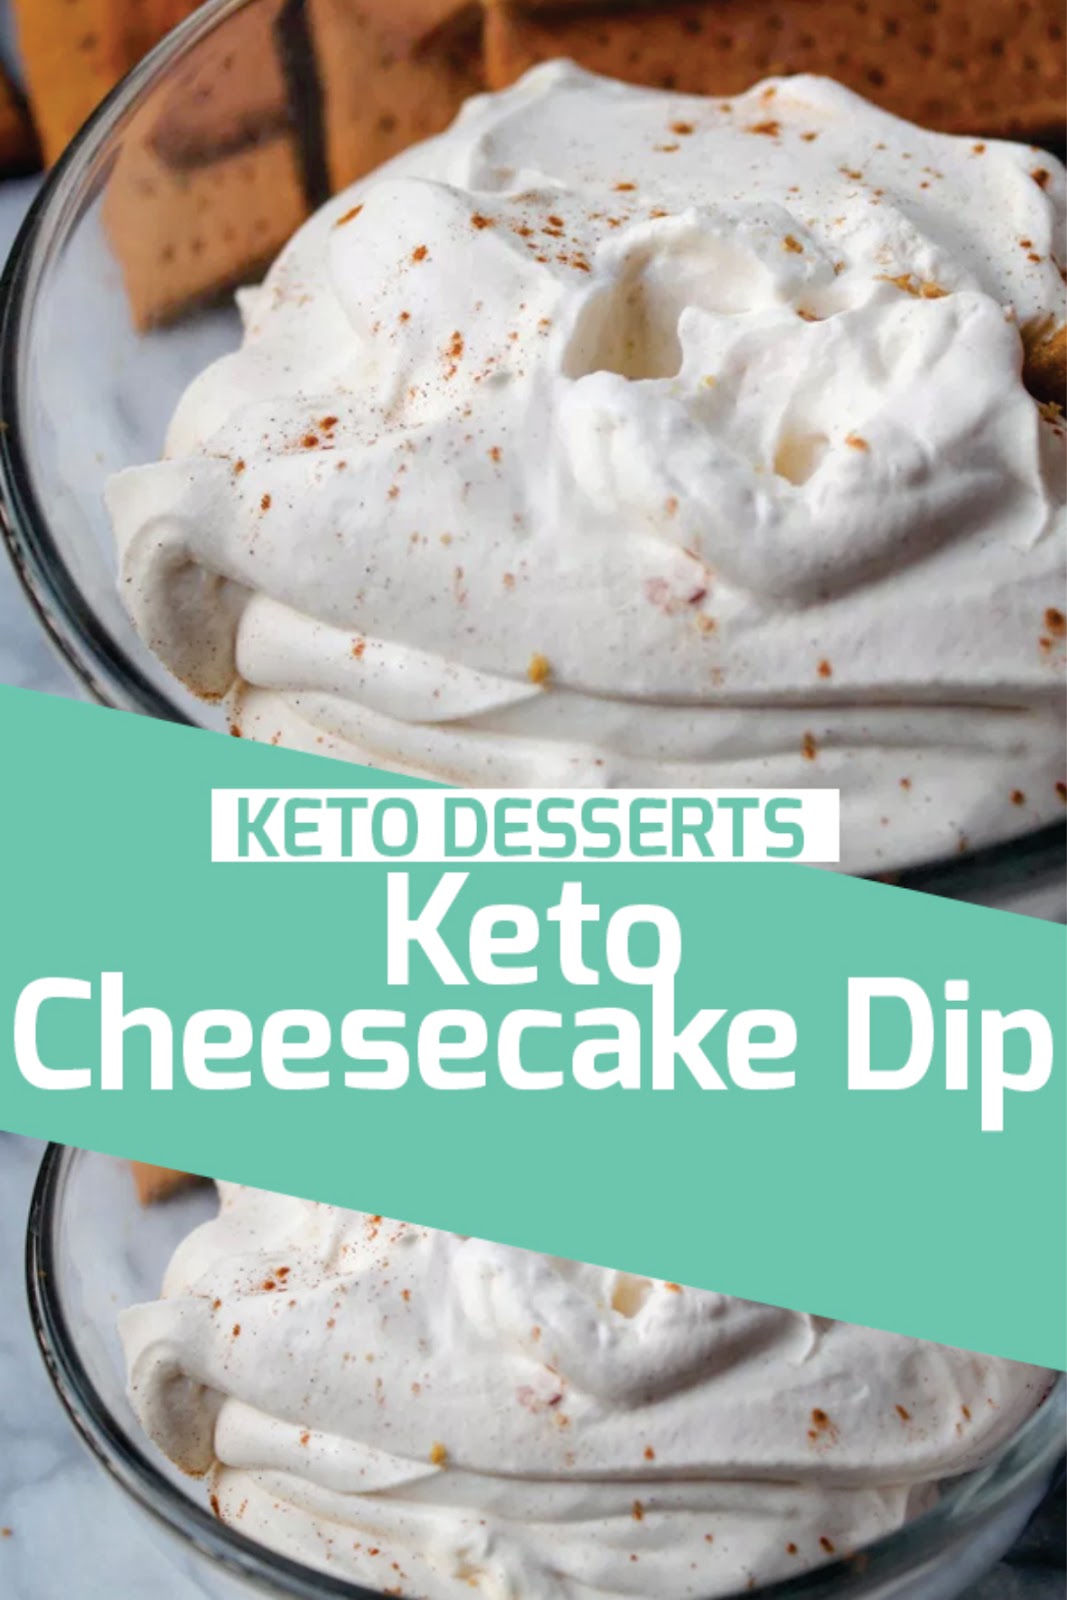 Keto Cheesecake Dip - Food and share it